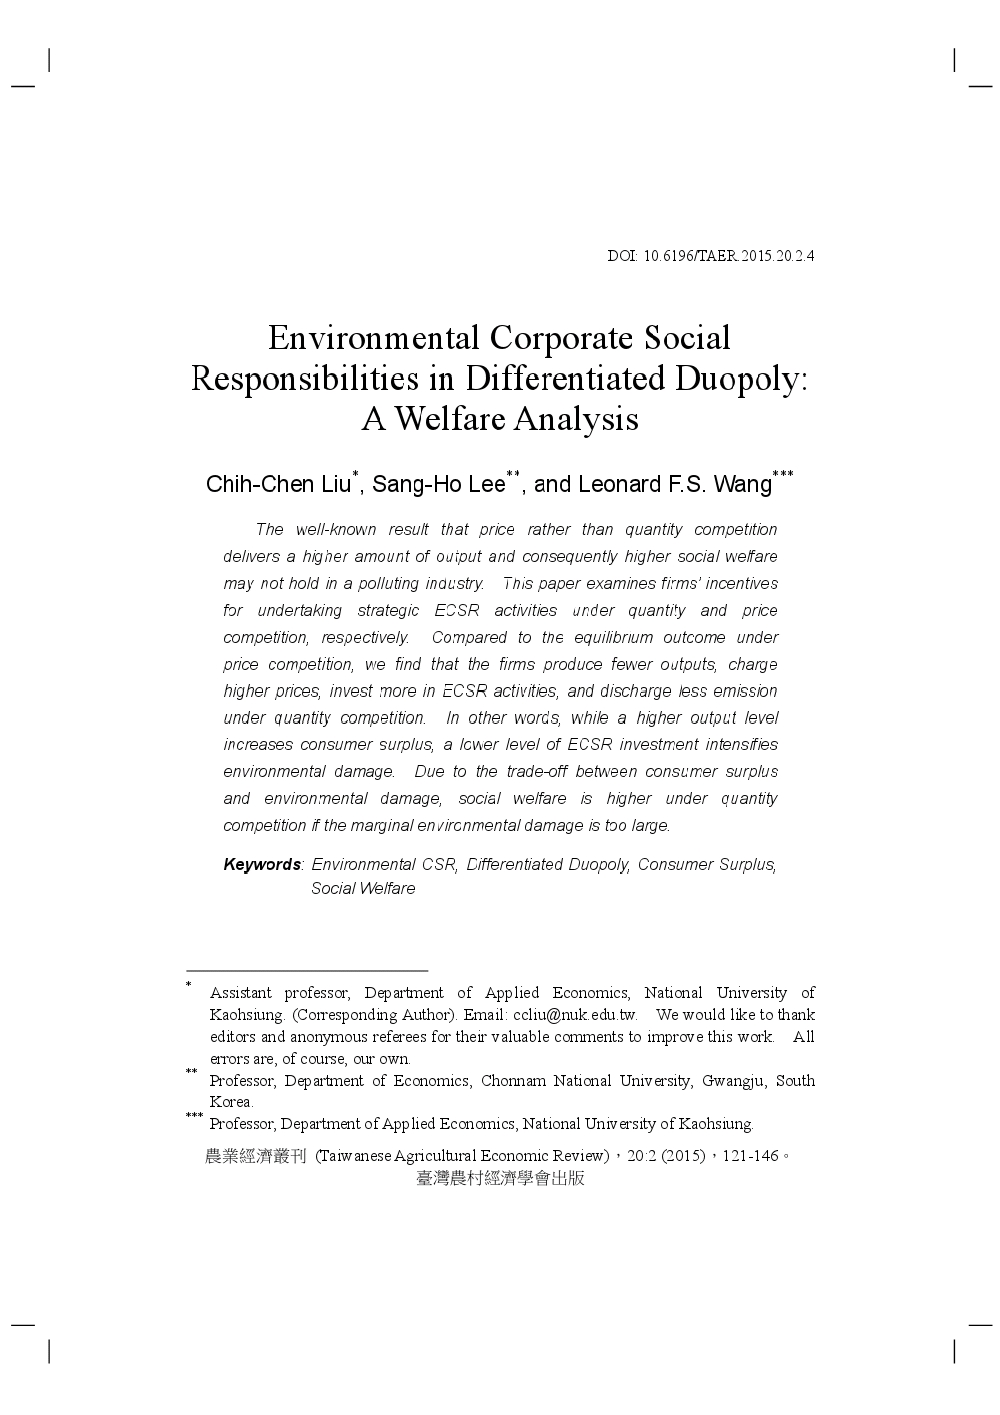 Environmental_Corporate_Social_Responsibilities_in_Differentiated_Duopoly-A_Welfare_Analysis.jpg